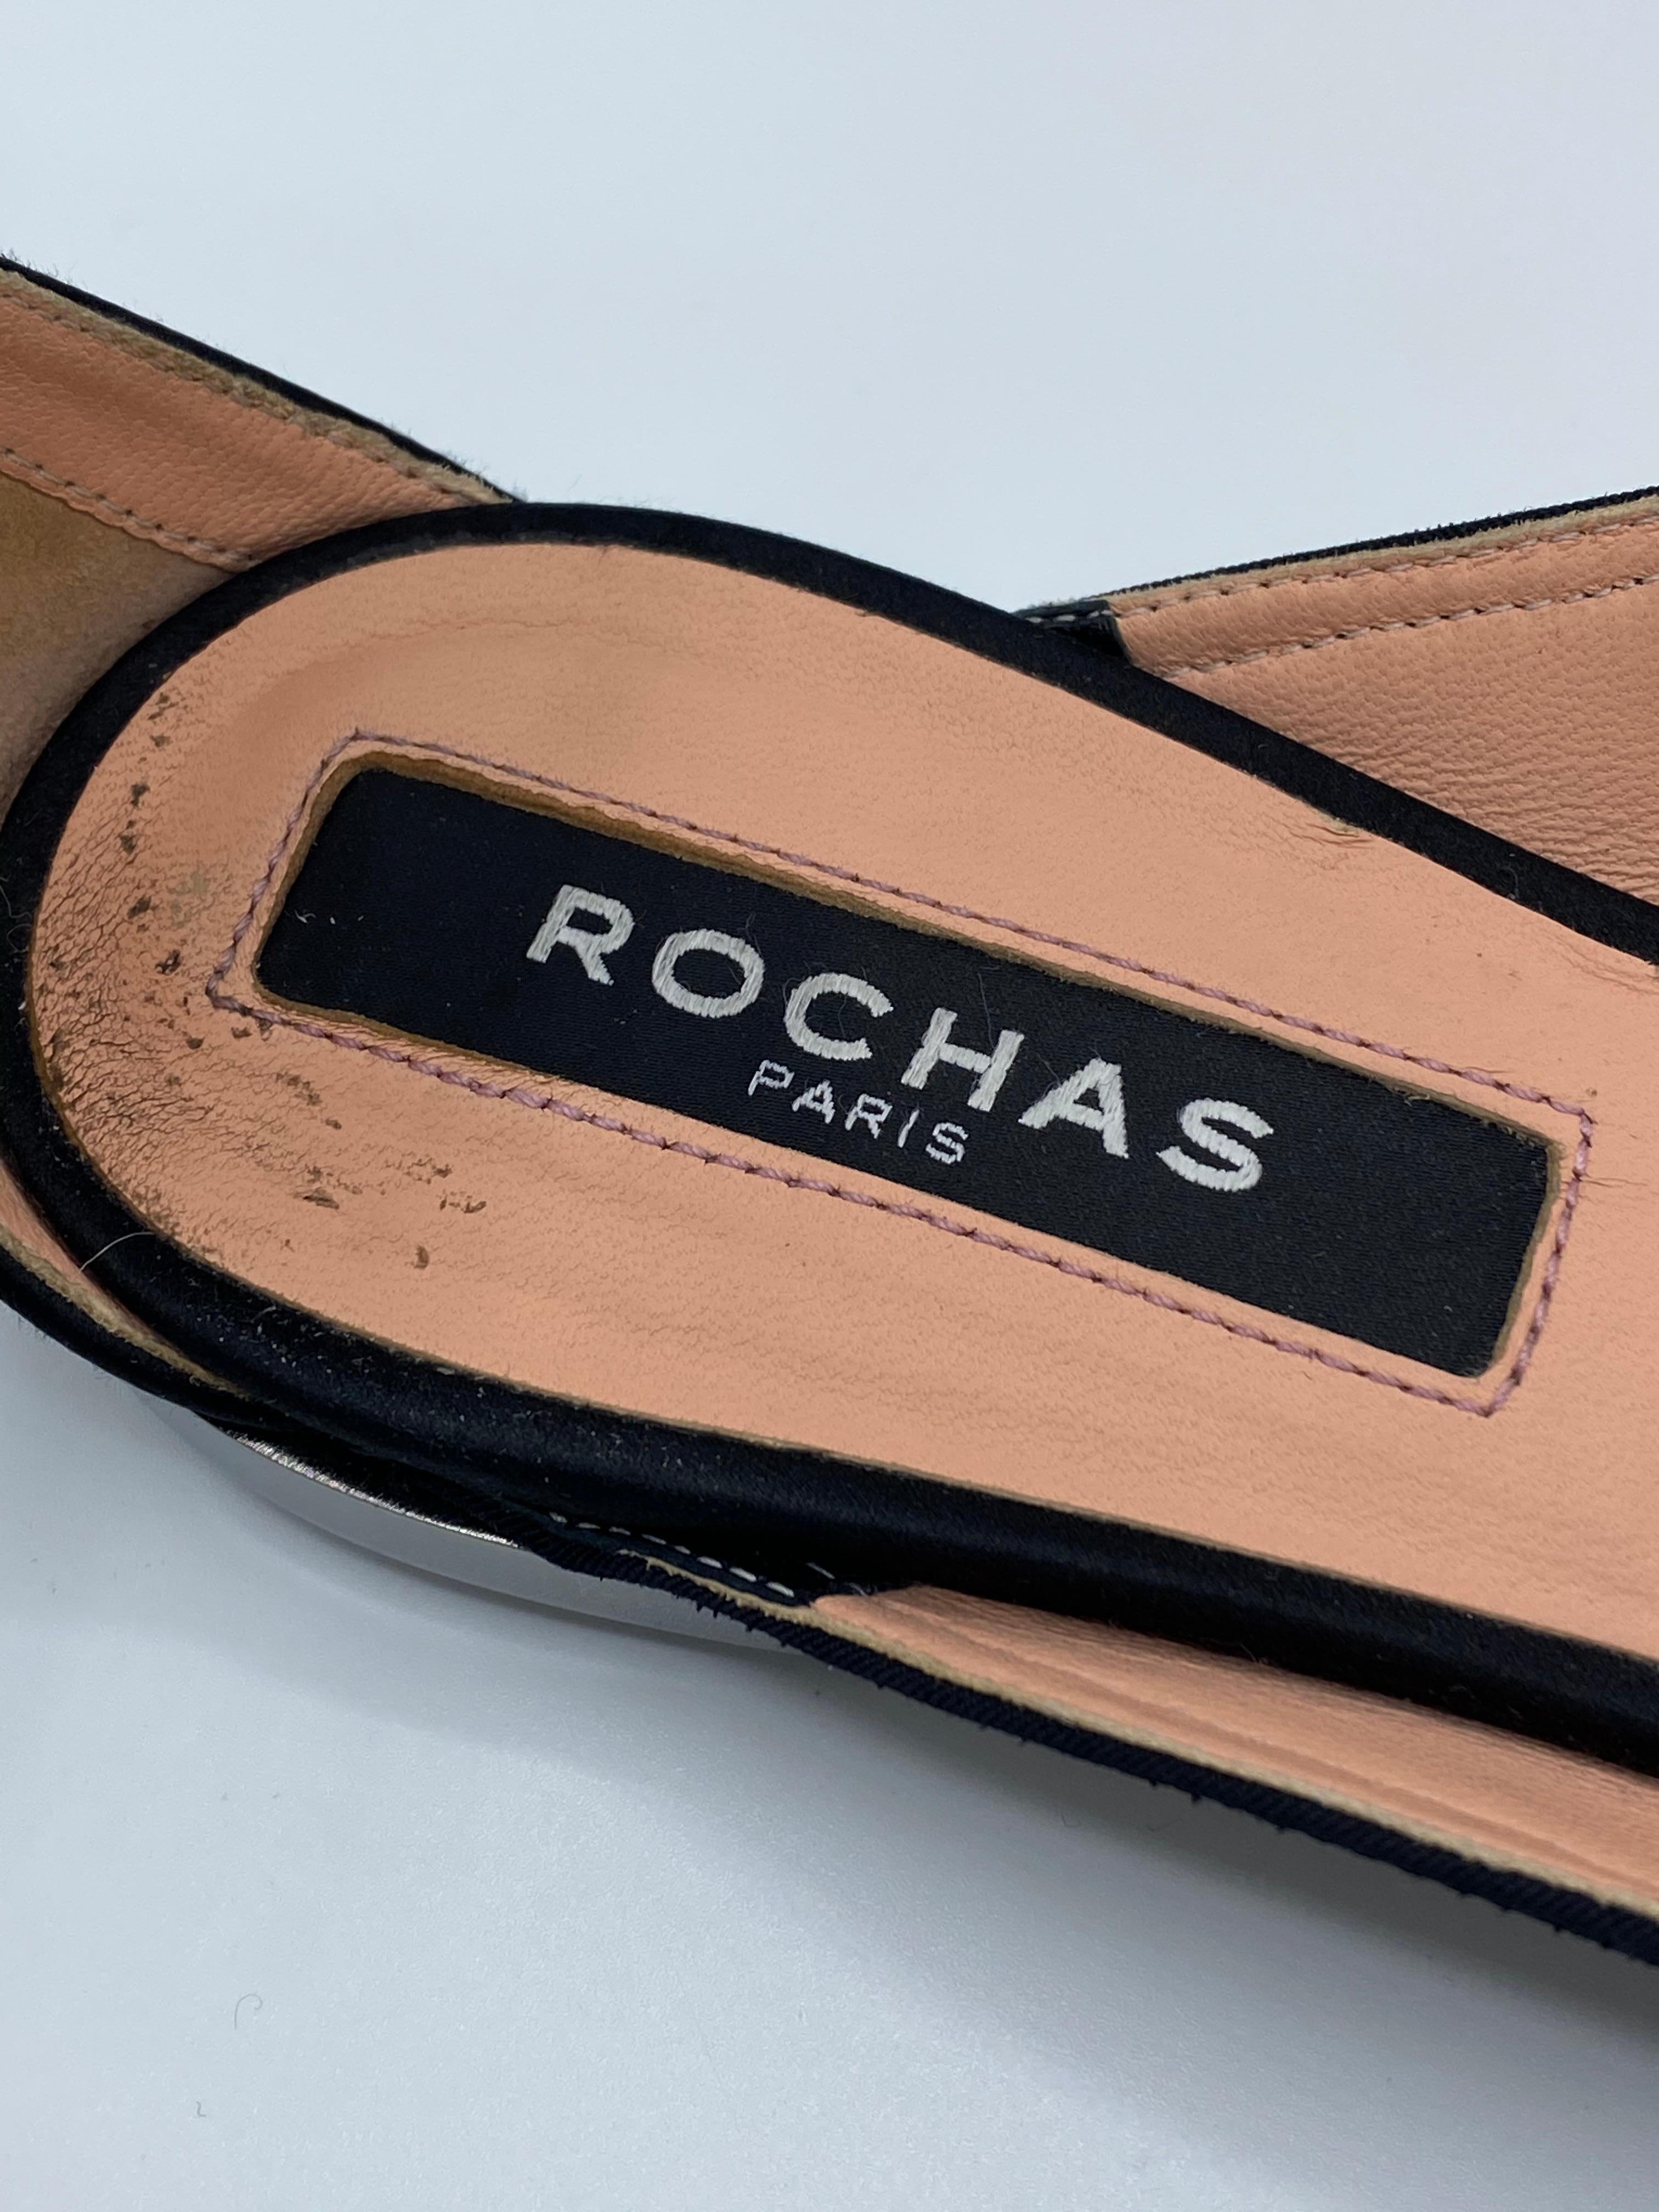 Rochas Paris Satin Grain and Black Pointed Toe Flats, Size 38.5 For Sale 1